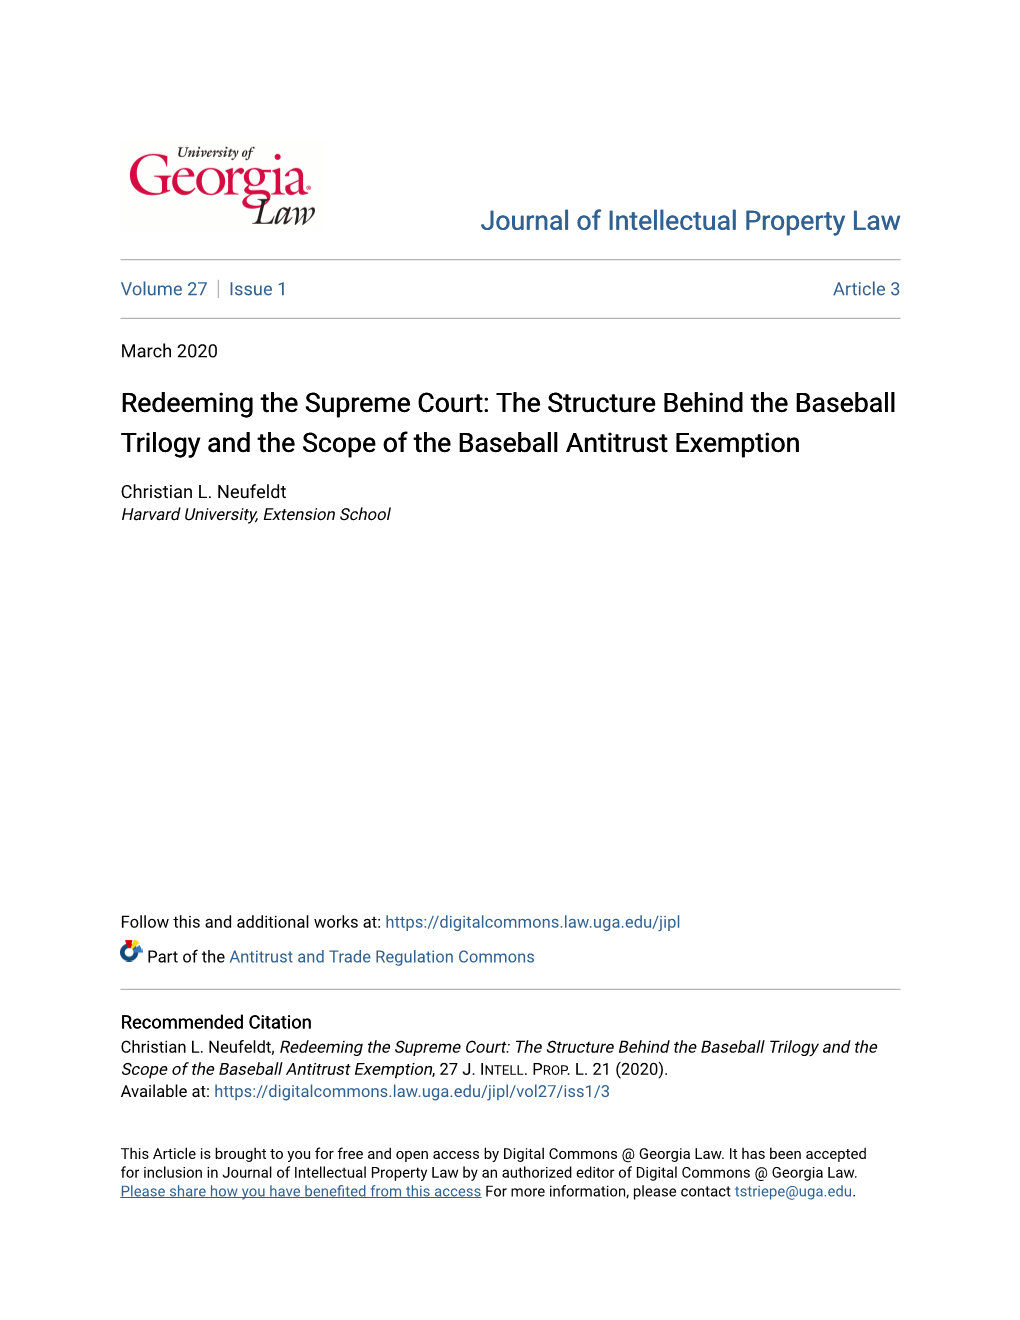 Redeeming the Supreme Court: the Structure Behind the Baseball Trilogy and the Scope of the Baseball Antitrust Exemption